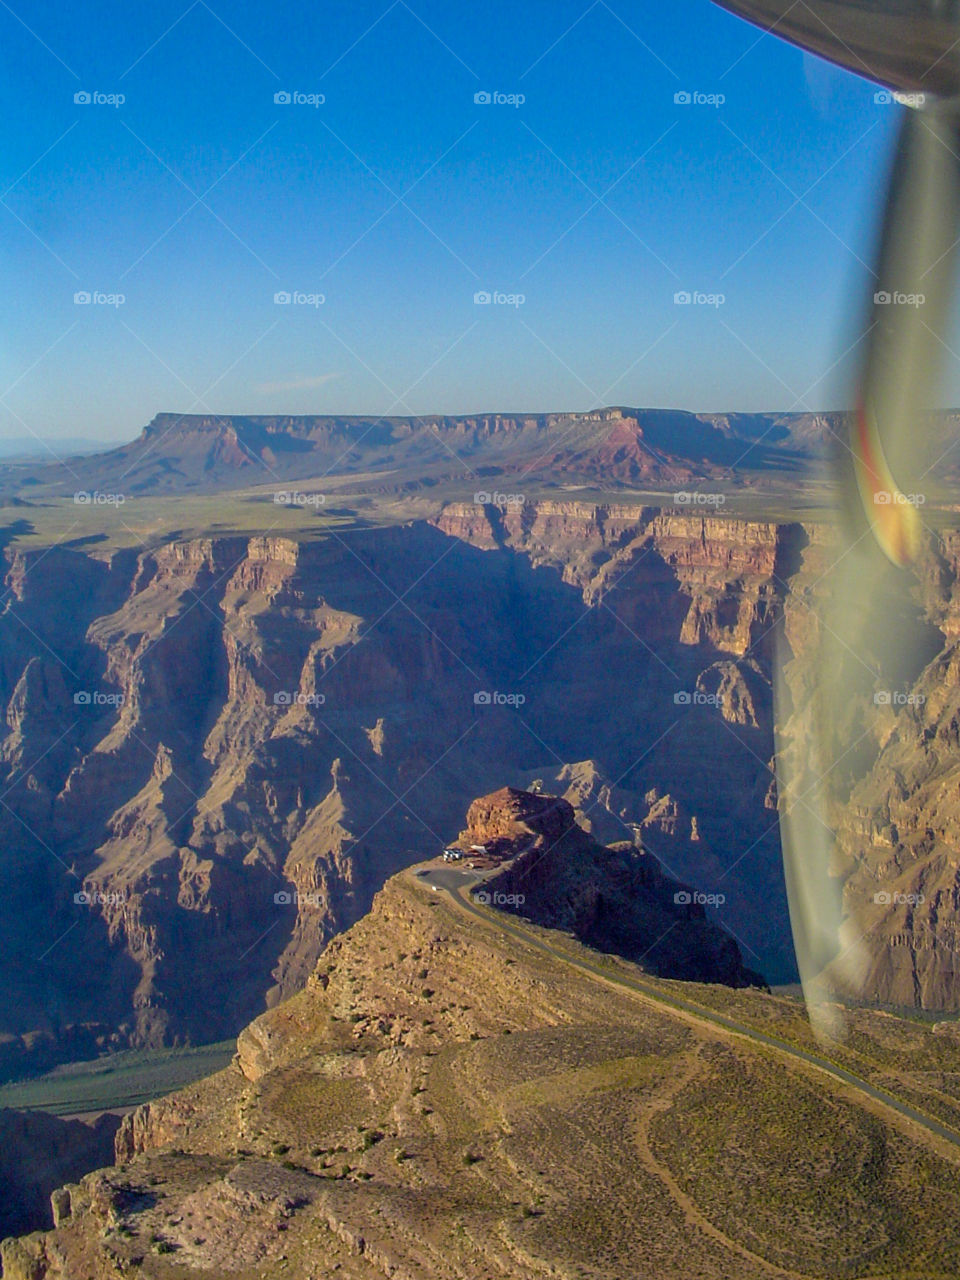 Small aircraft flying over
 the Grand Canyon ; amazing